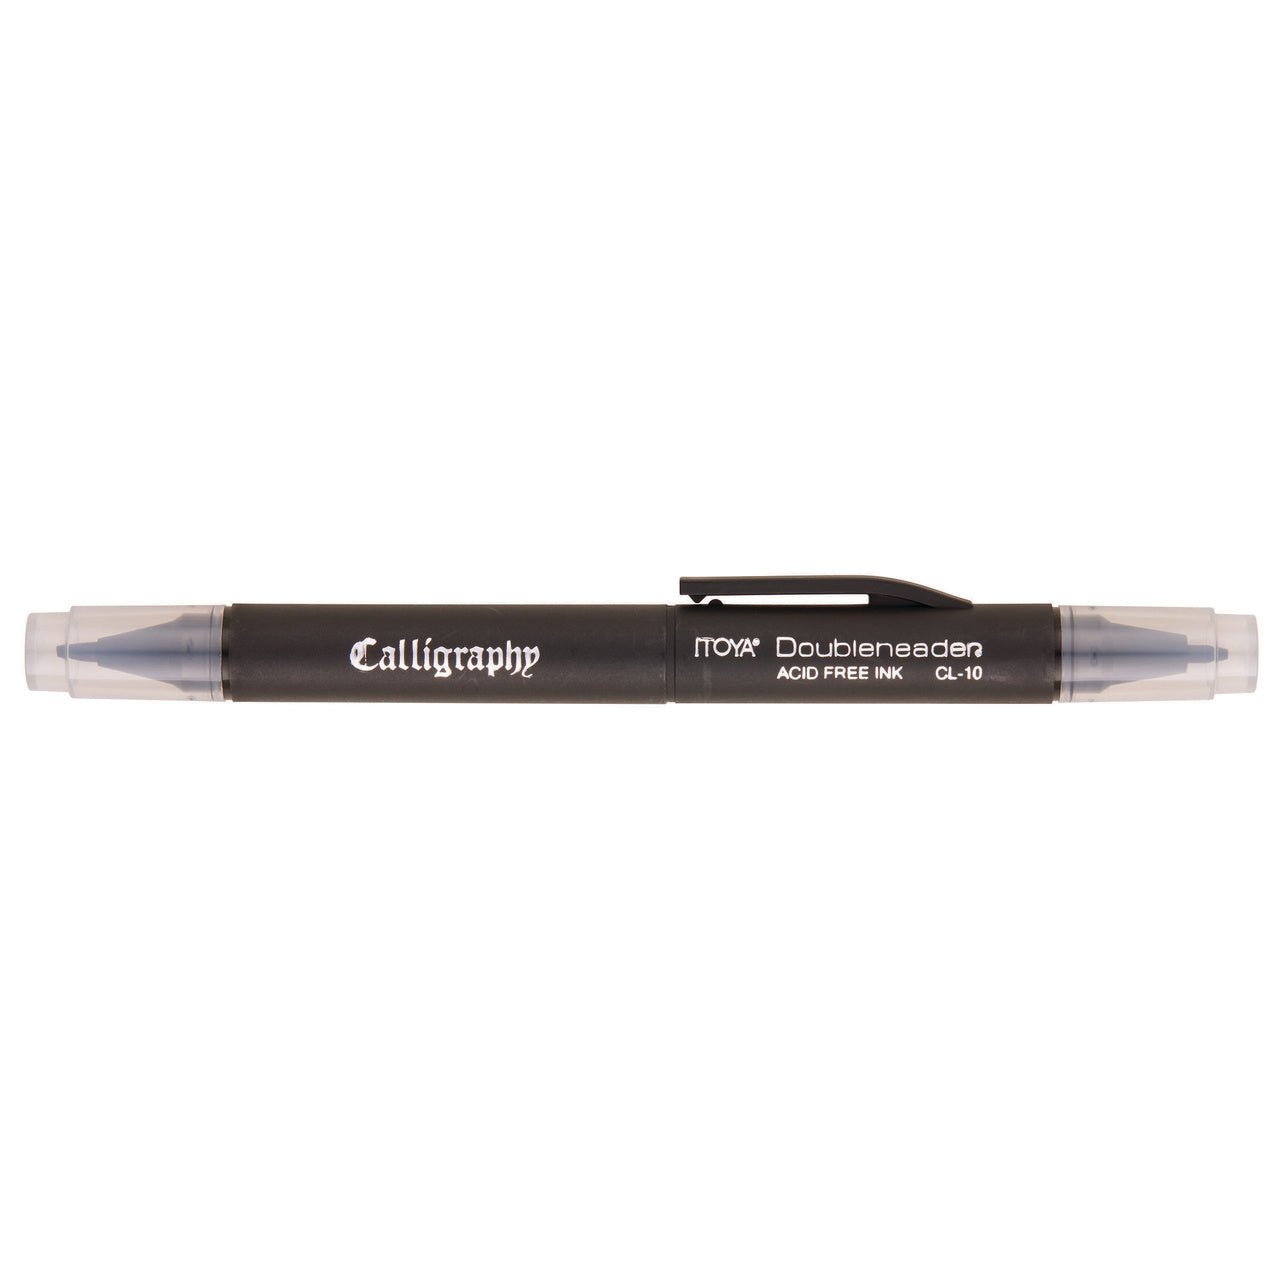 Itoya Doubleheader Calligraphy Marker 1.5 mm and 3.0 mm, Black - merriartist.com